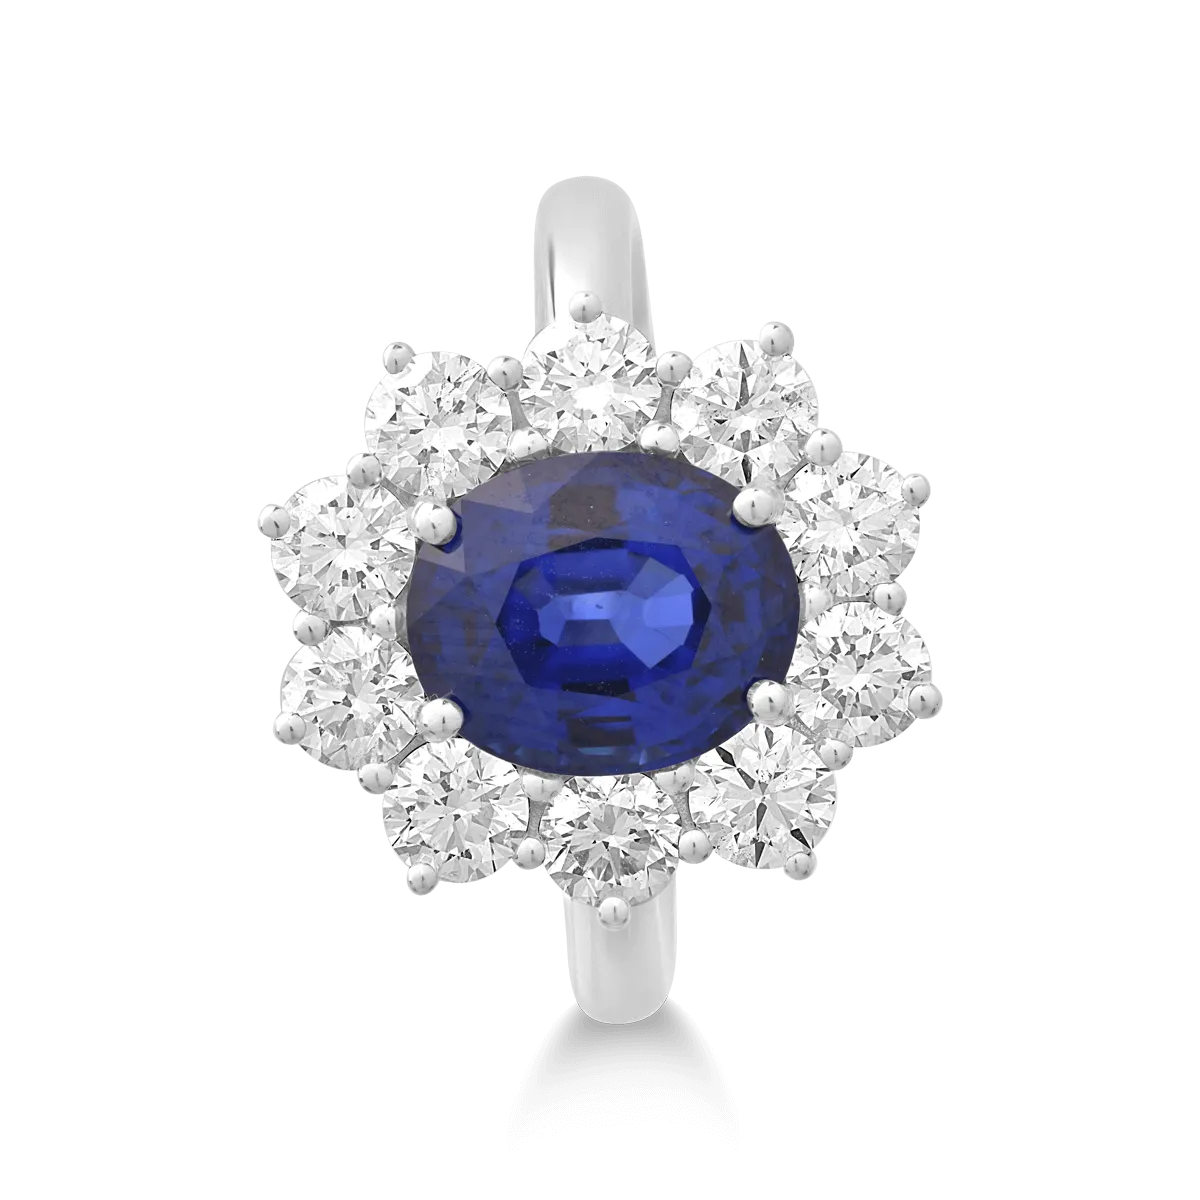 18K white gold ring with 3.42ct sapphire and 1.62ct diamonds